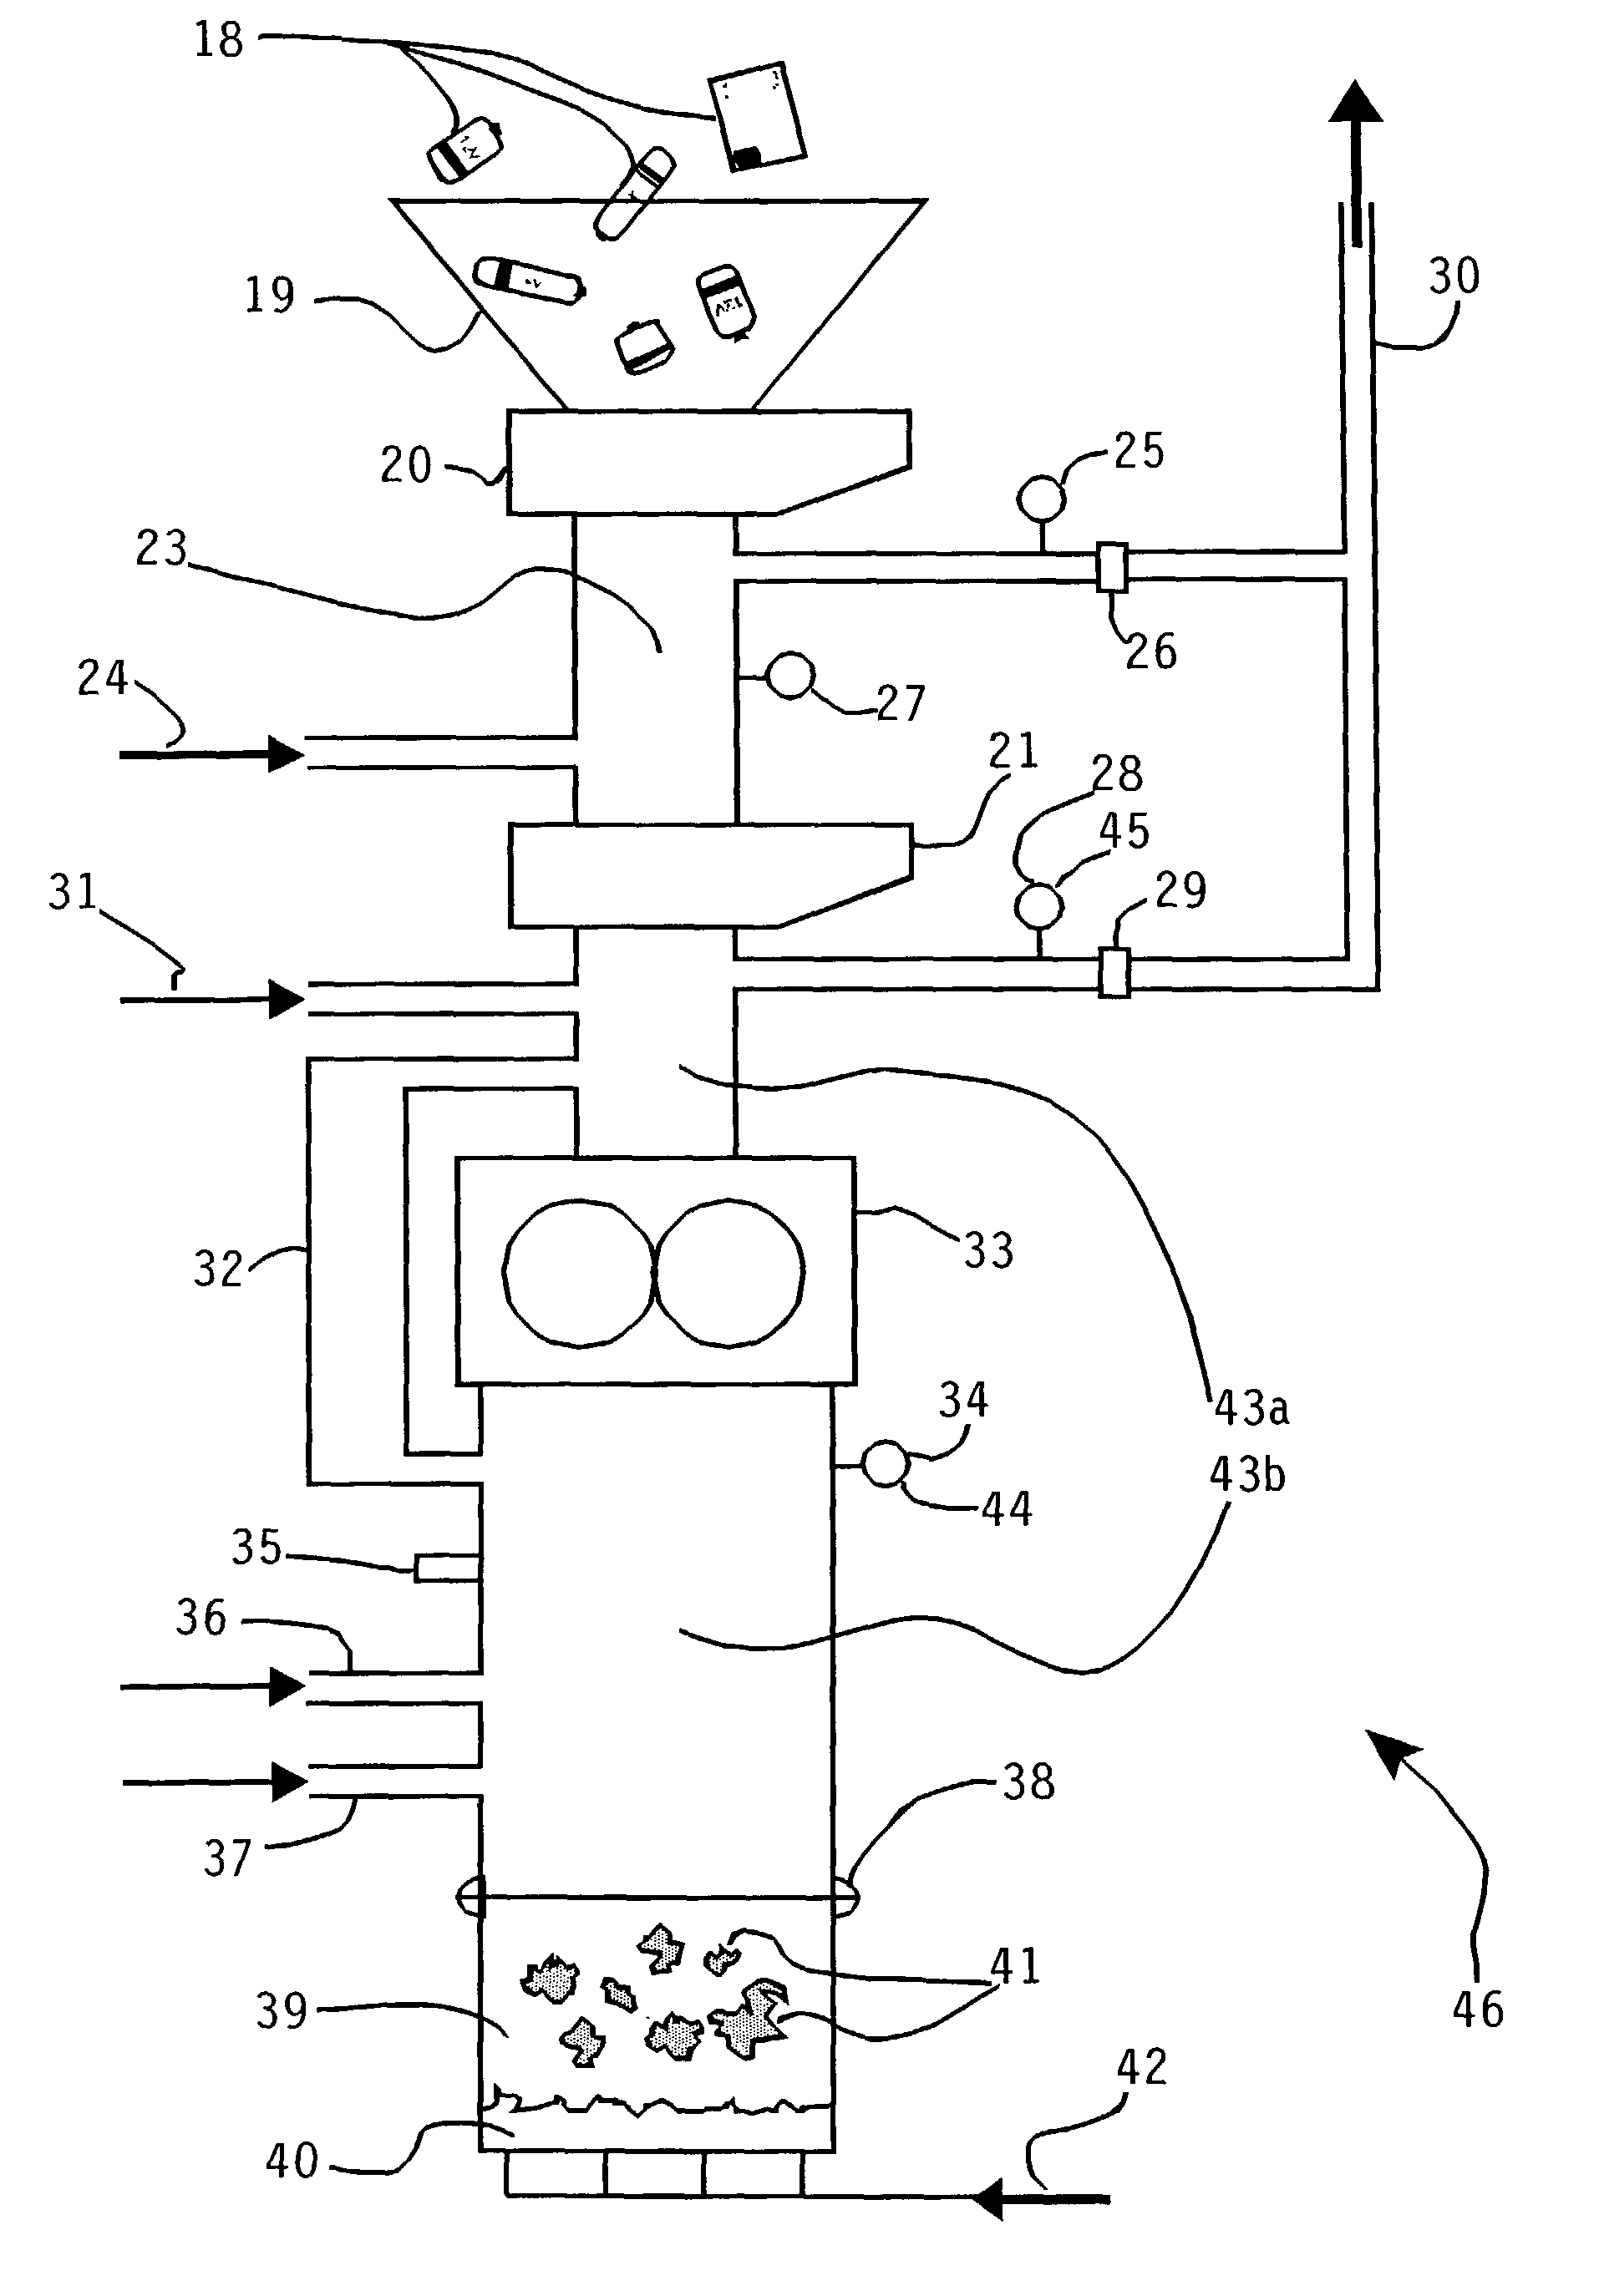 Method of and apparatus for dismantling and storage of objects comprising alkali metals, such as alkali metal containing batteries